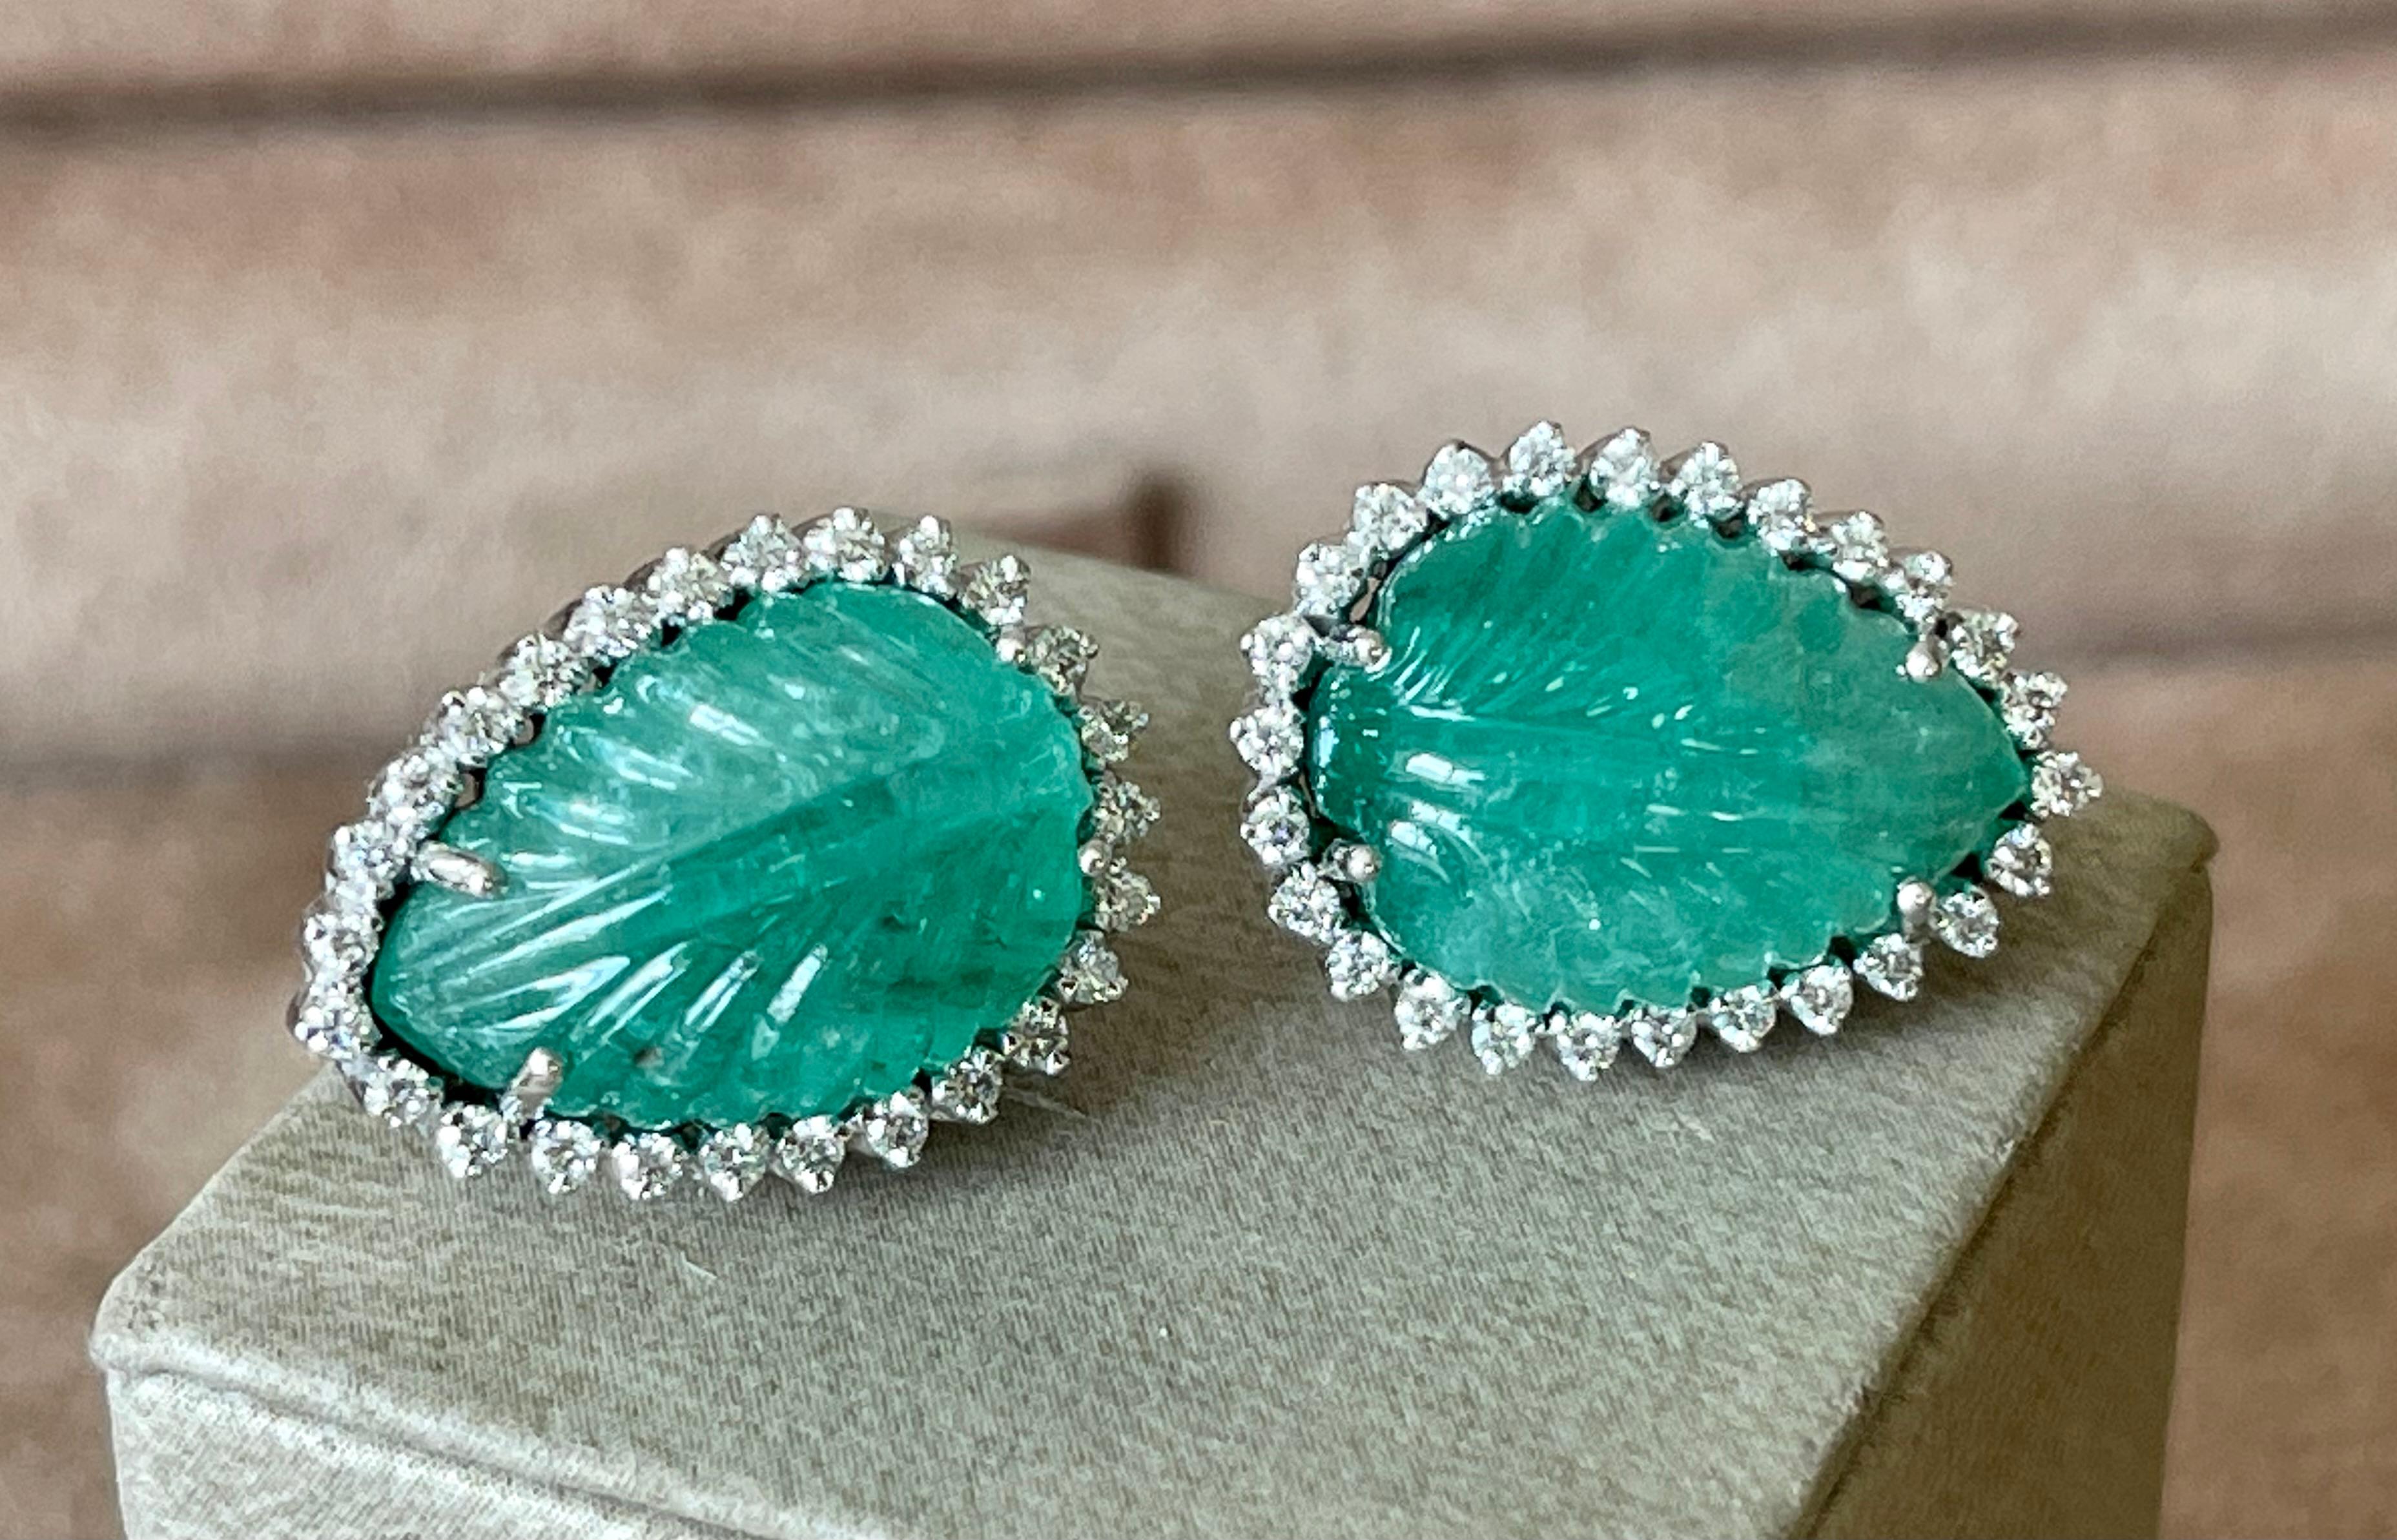 A pair of very elegant 18 K white Gold earrings featuring 2 pear shape beautifully carved Emerald Cabochons weighing 26.96 ct, both surrounded by 52 brillinat cut Diamonds weiging 0.75 ct.
Dimensions: 2.12 cm x 1.52 cm. 
Masterfully handcrafted